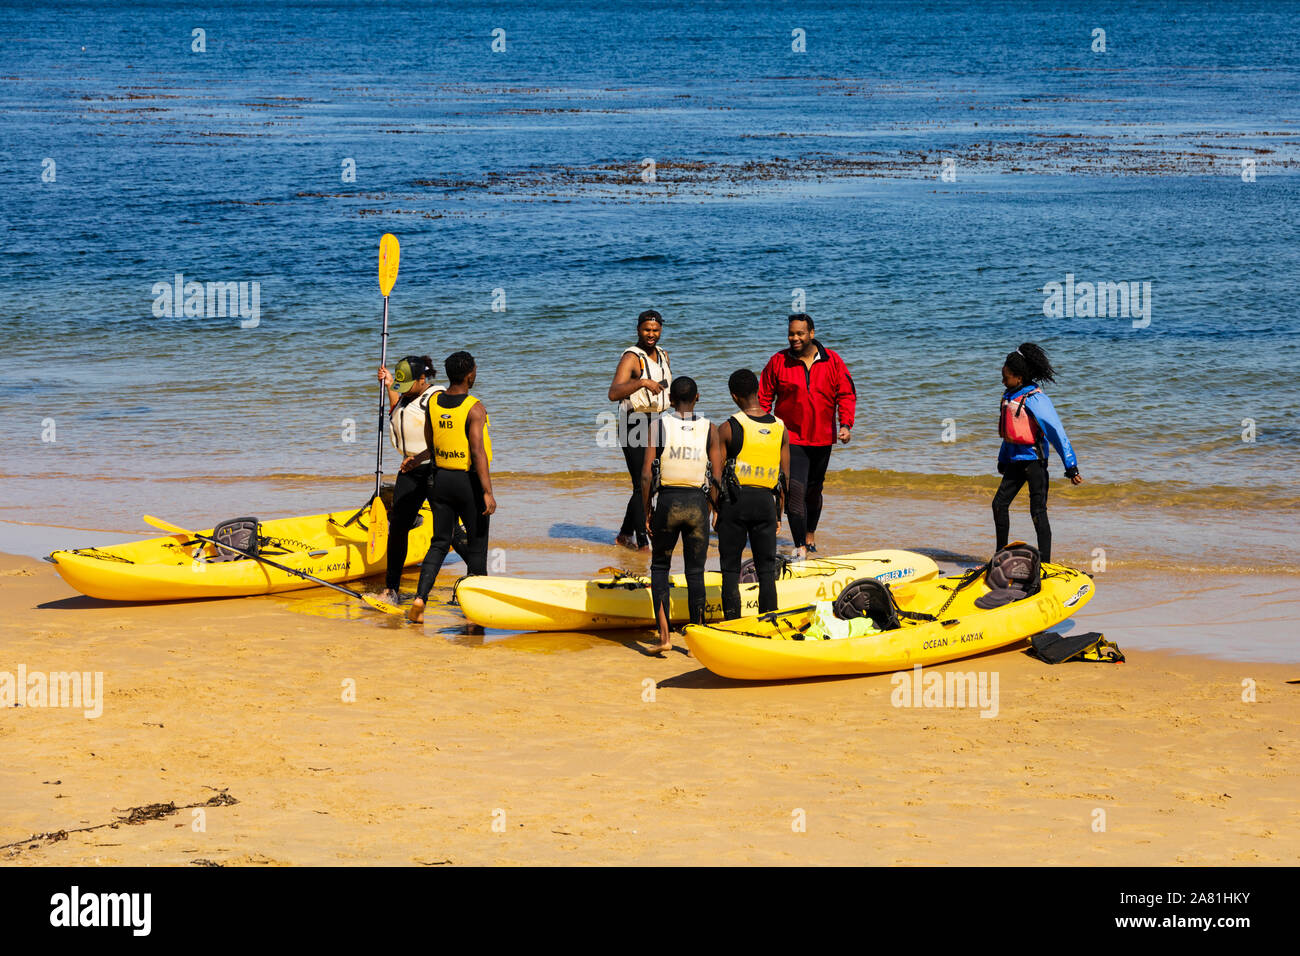 A group of people learning to kayak, San Carlos beach, Monterey, California, United States of America. Stock Photo